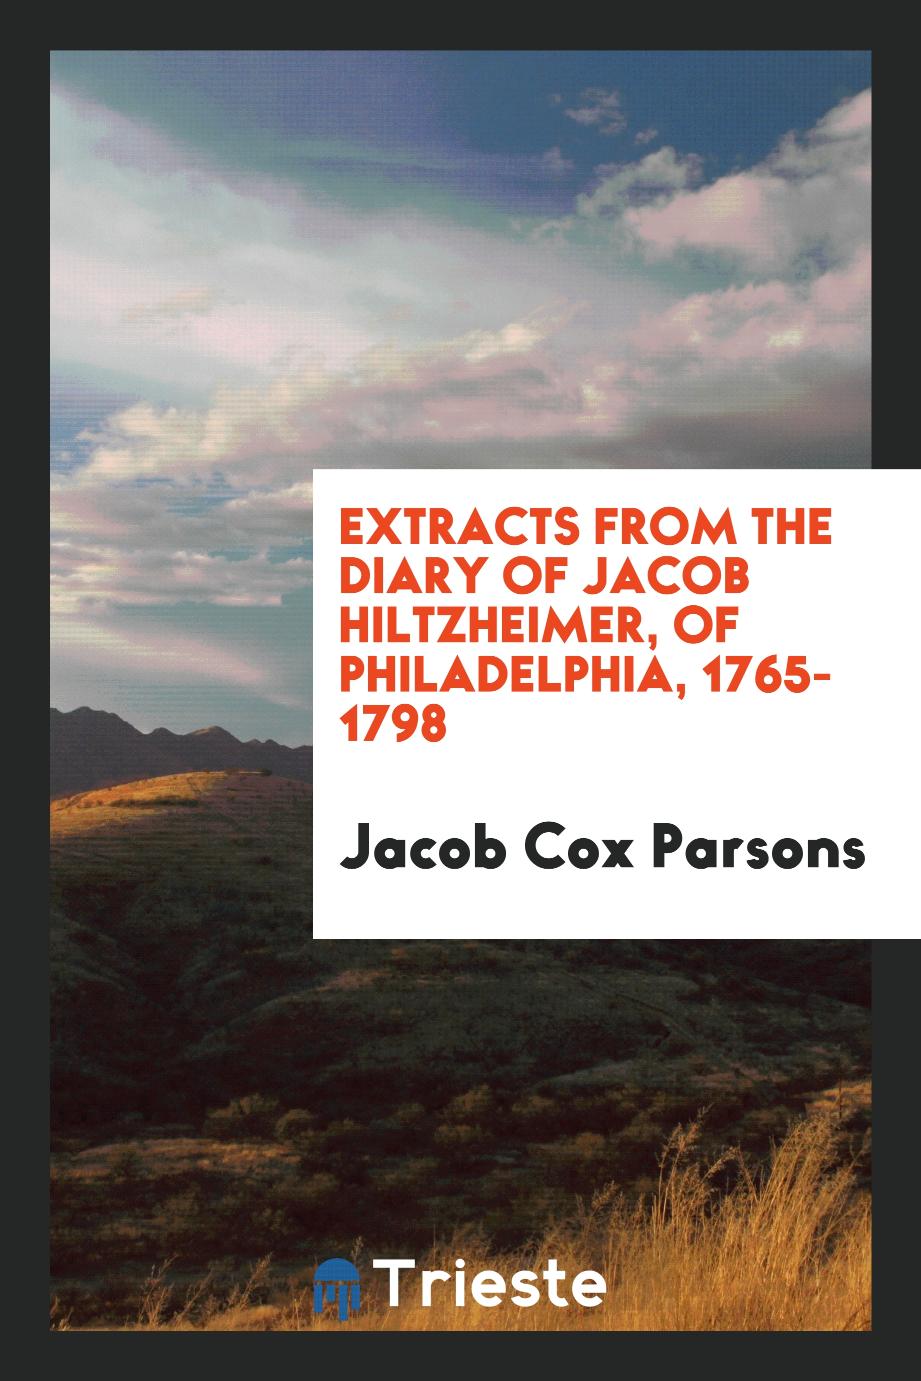 Extracts from the Diary of Jacob Hiltzheimer, of Philadelphia, 1765-1798